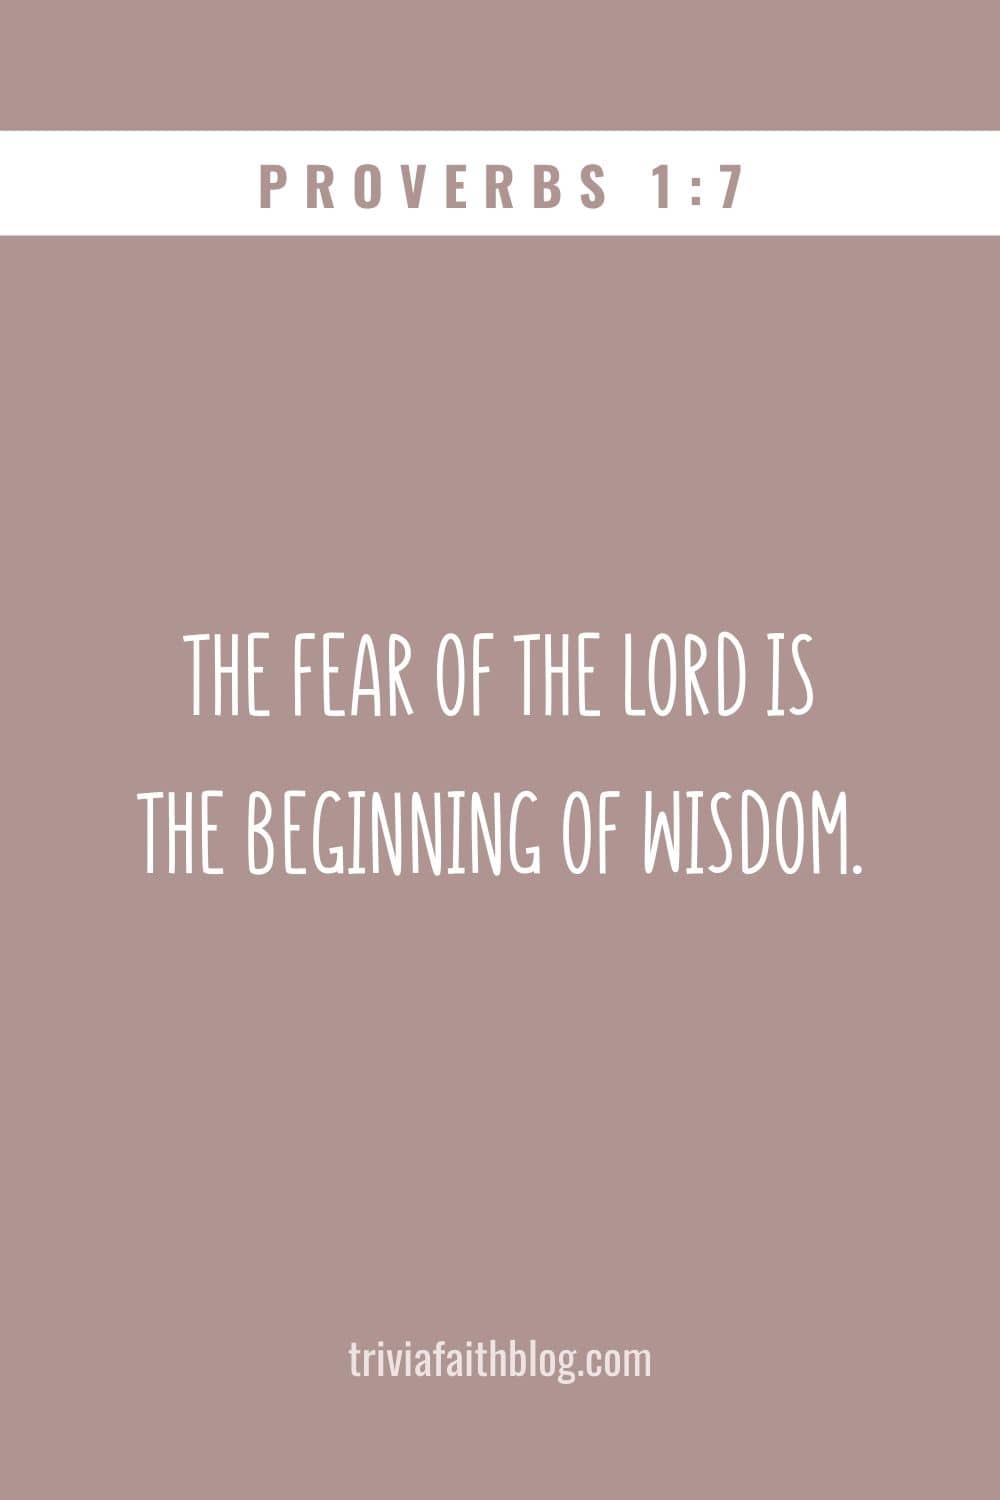 The fear of the LORD is the beginning of wisdom